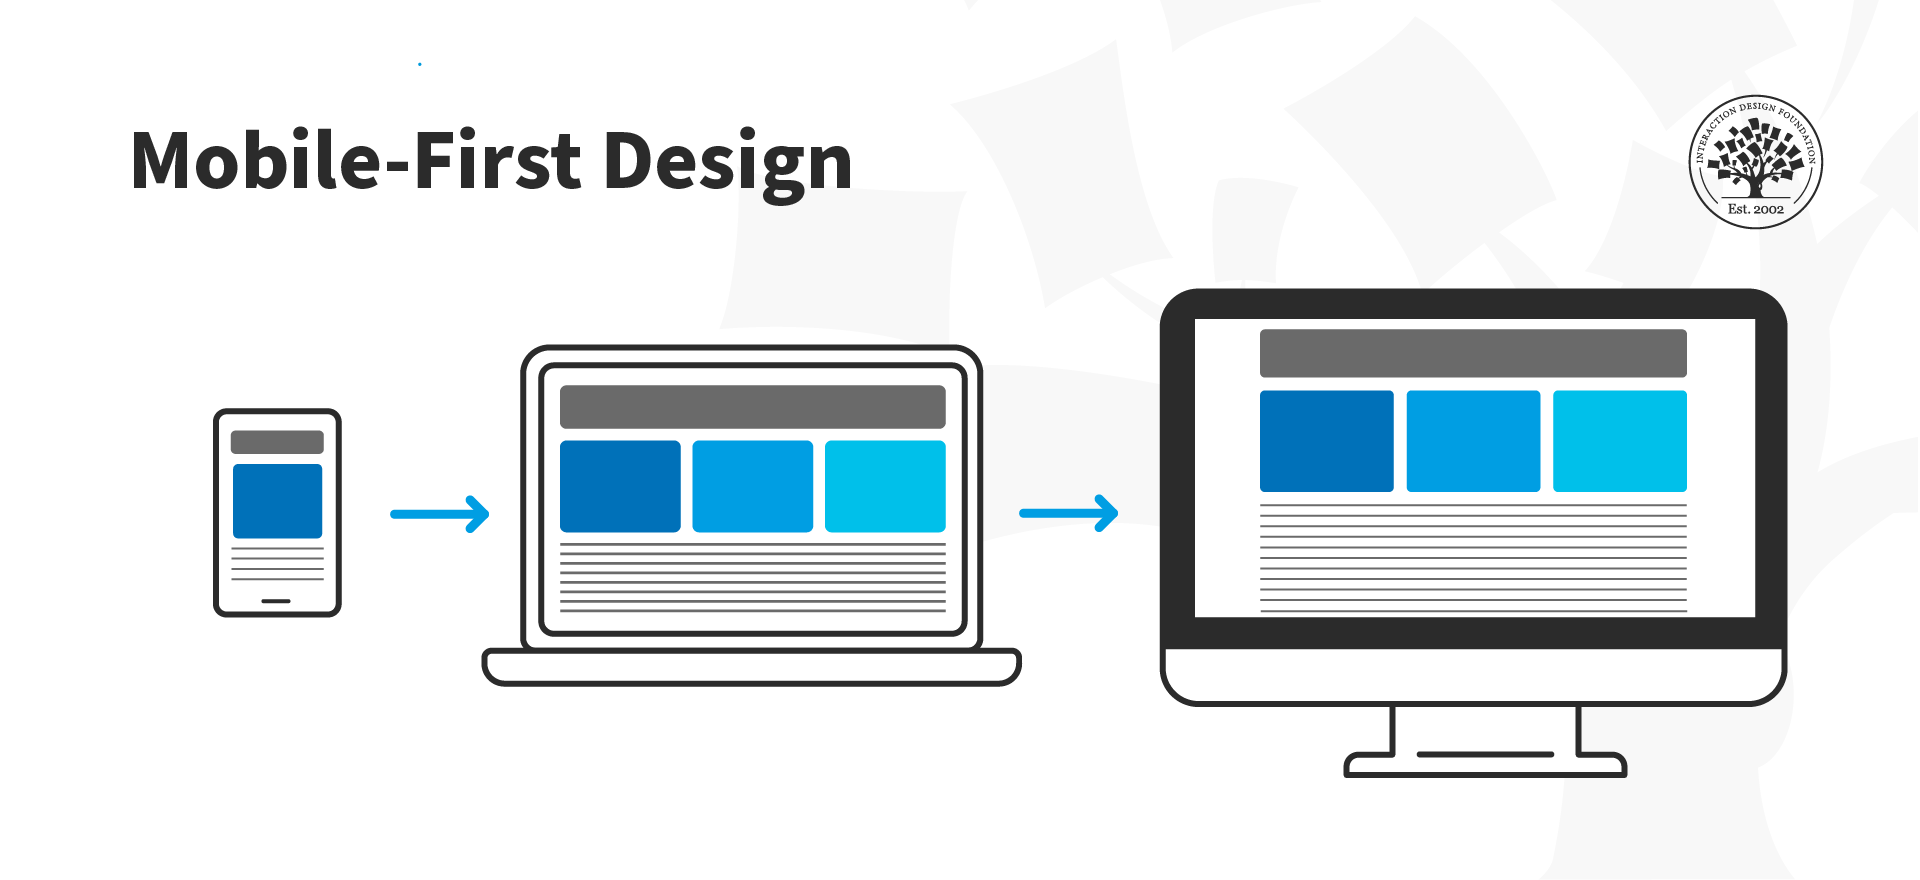 Mobile-first design approach